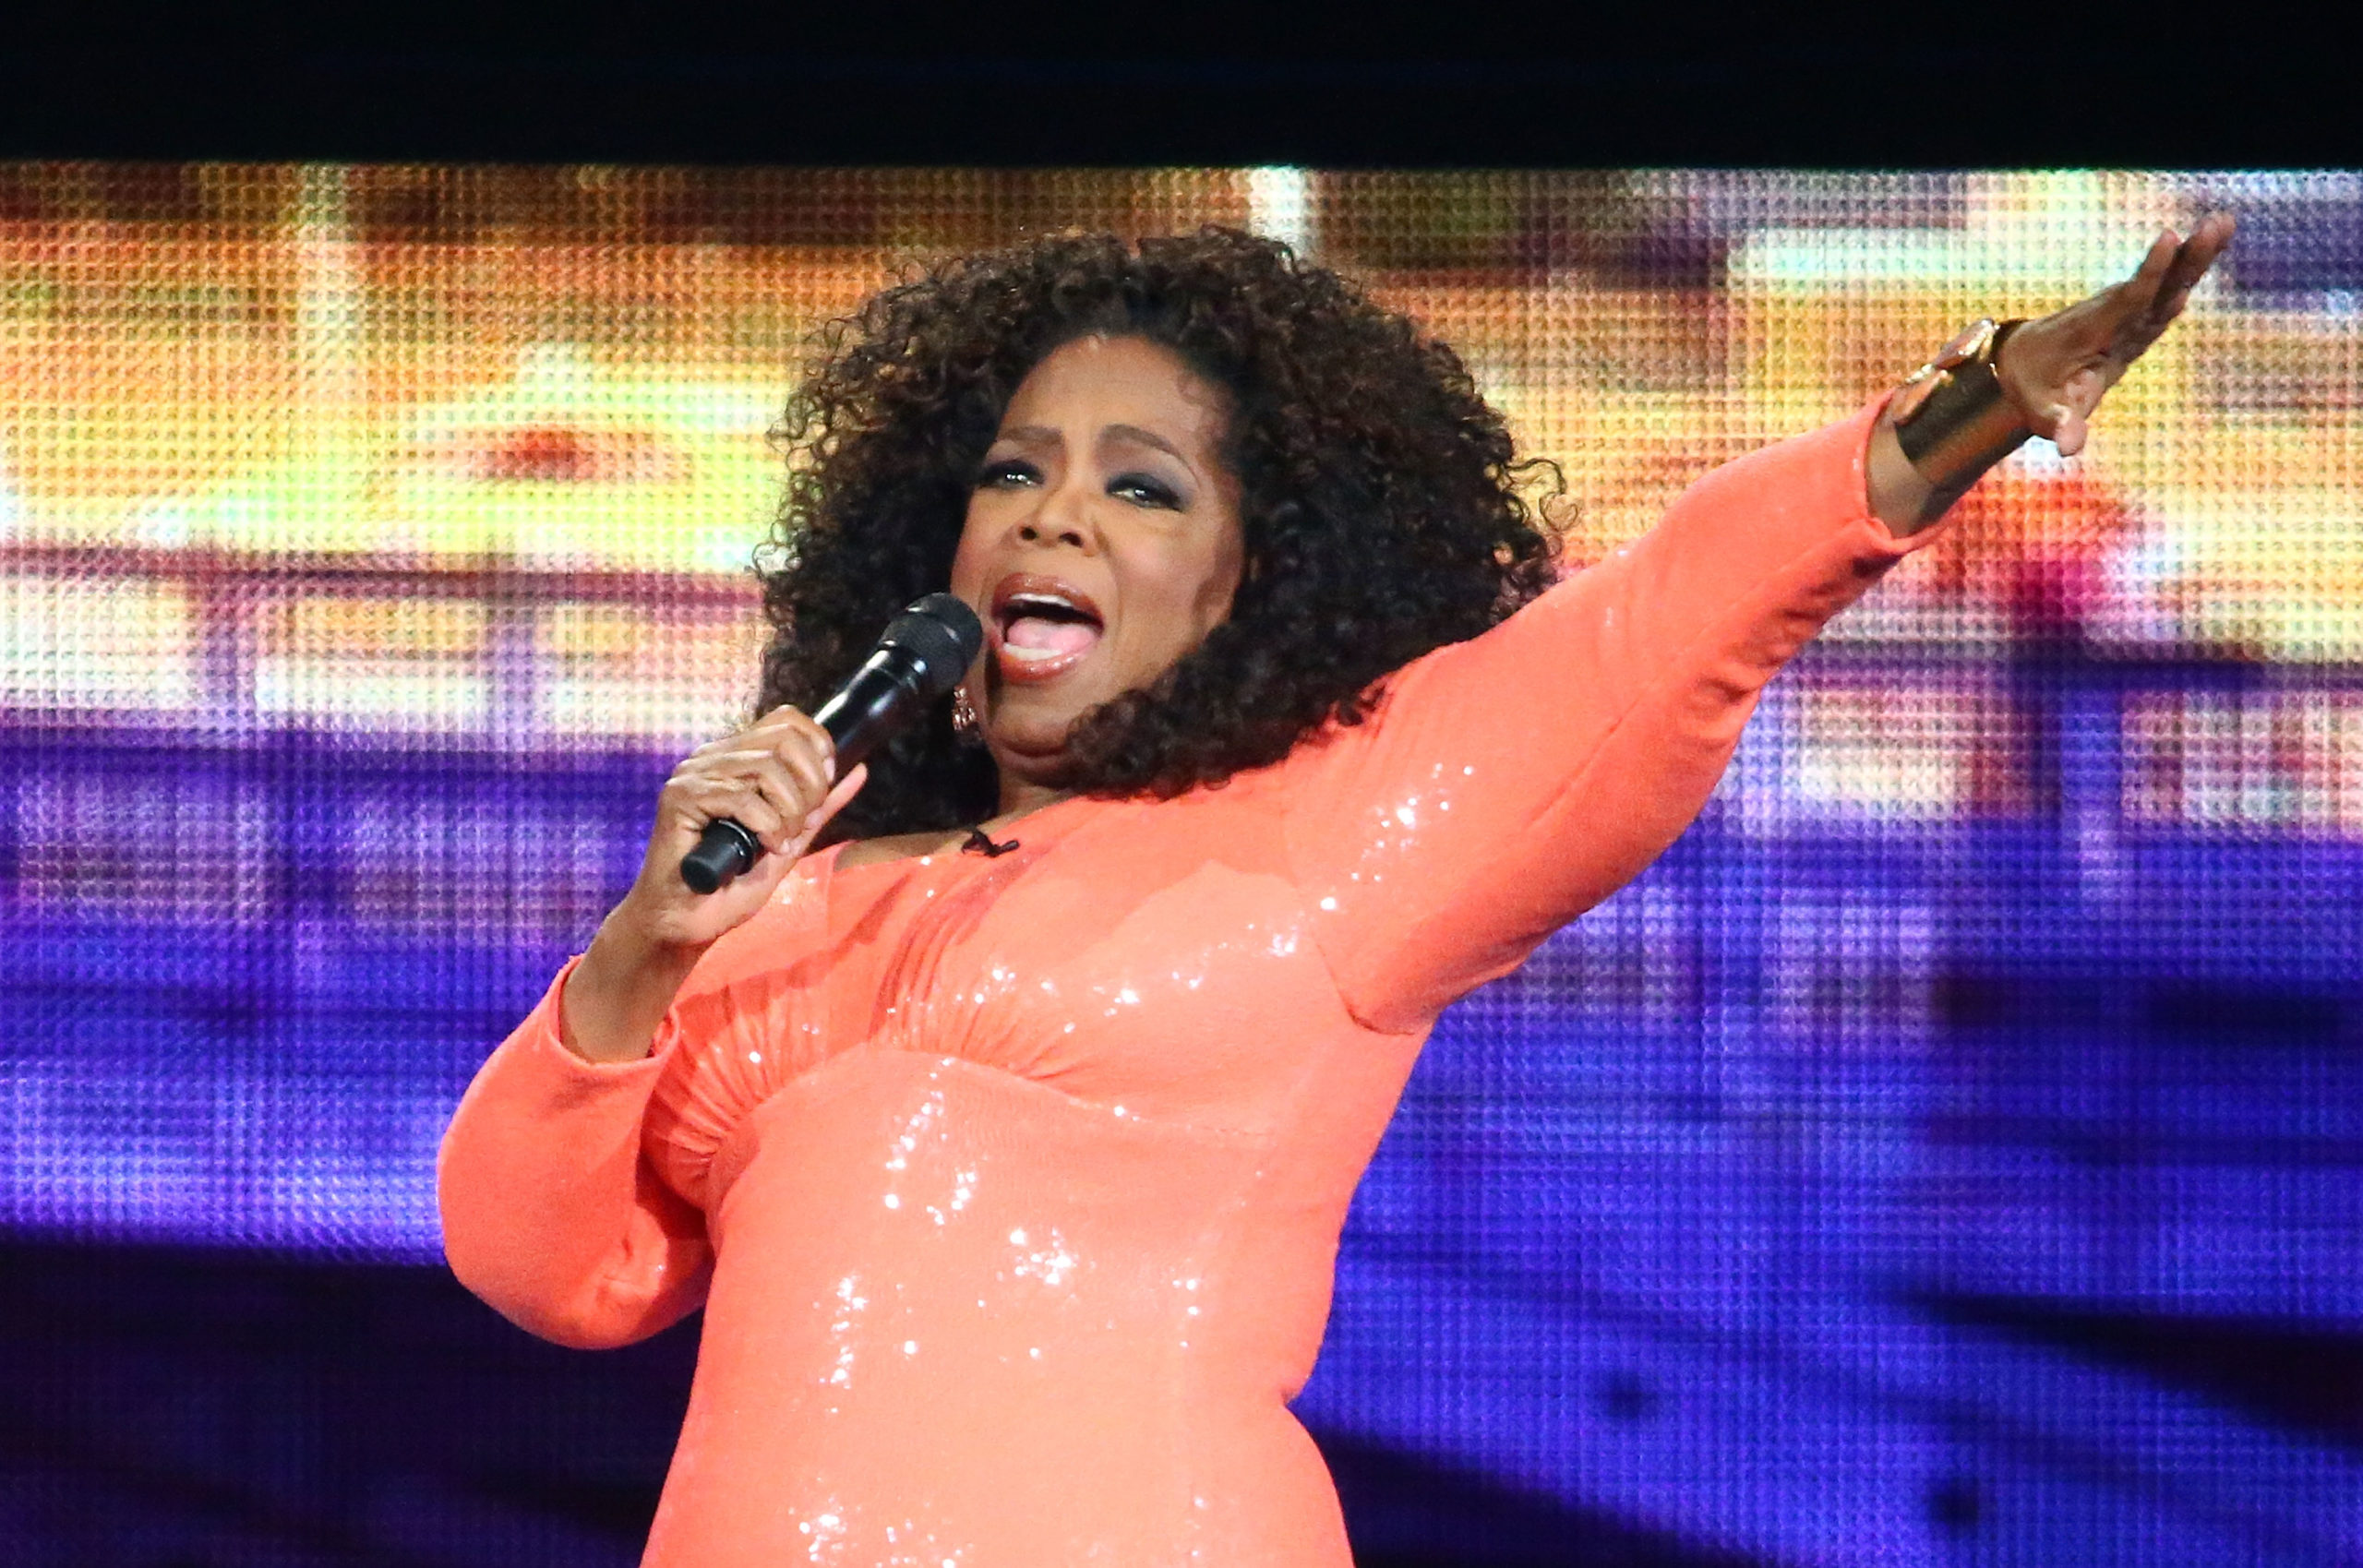 Oprah Winfrey on stage during her An Evening With Oprah tour on December 2, 2015 in Melbourne, Australia. (Photo by Scott Barbour/Getty Images)